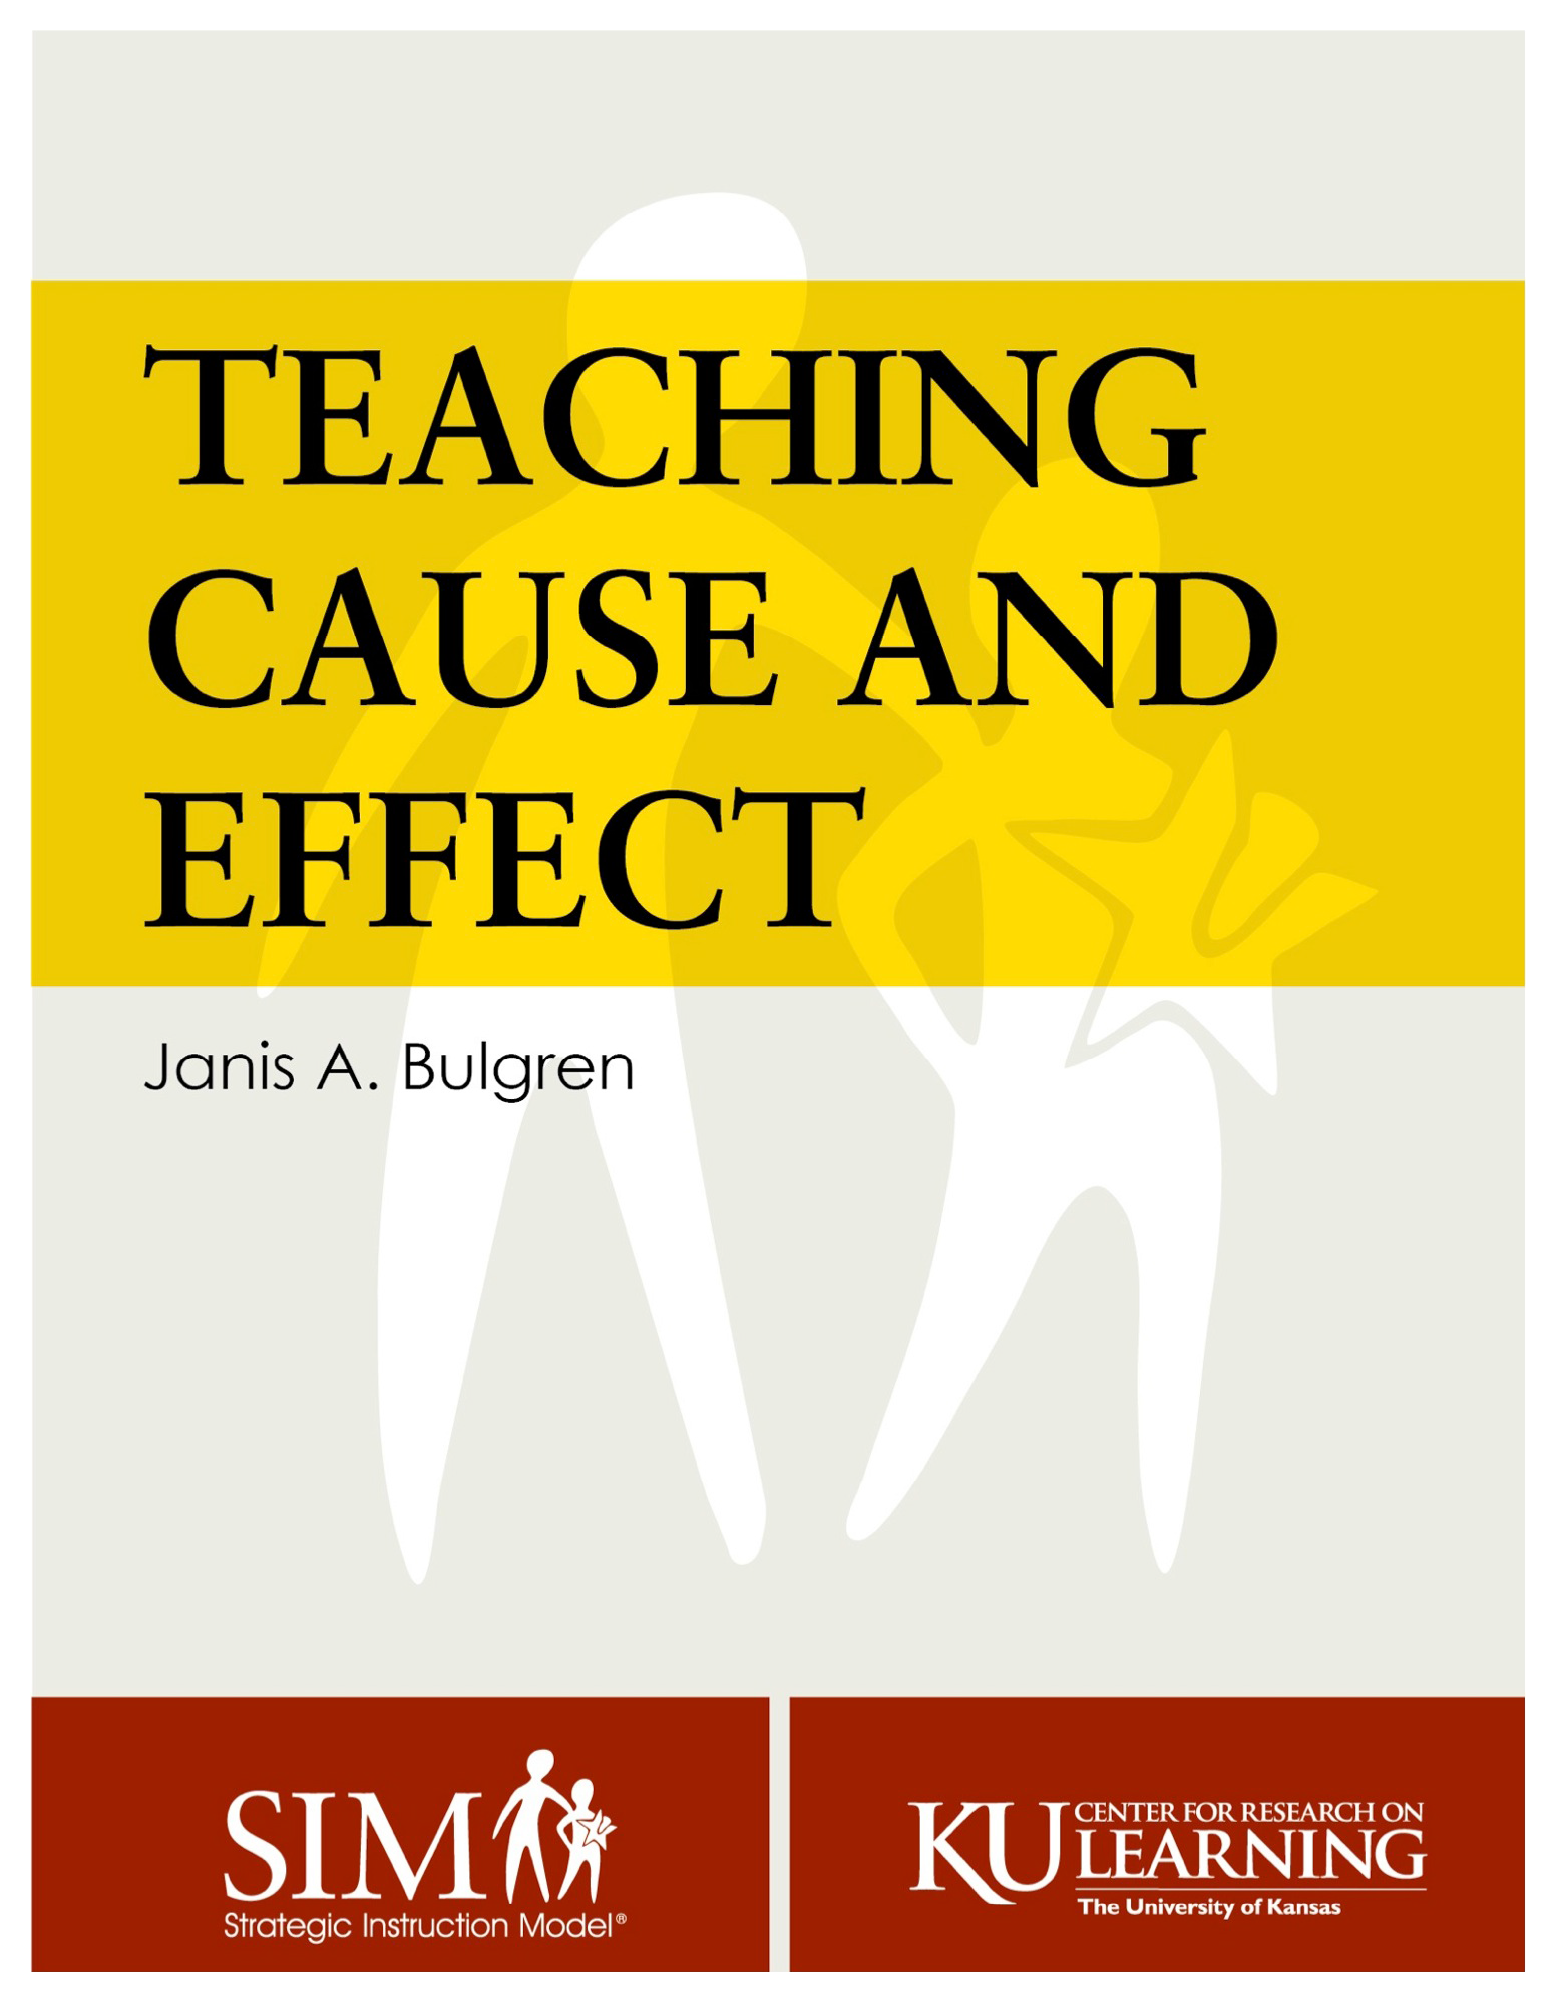 Teaching Cause and Effect book